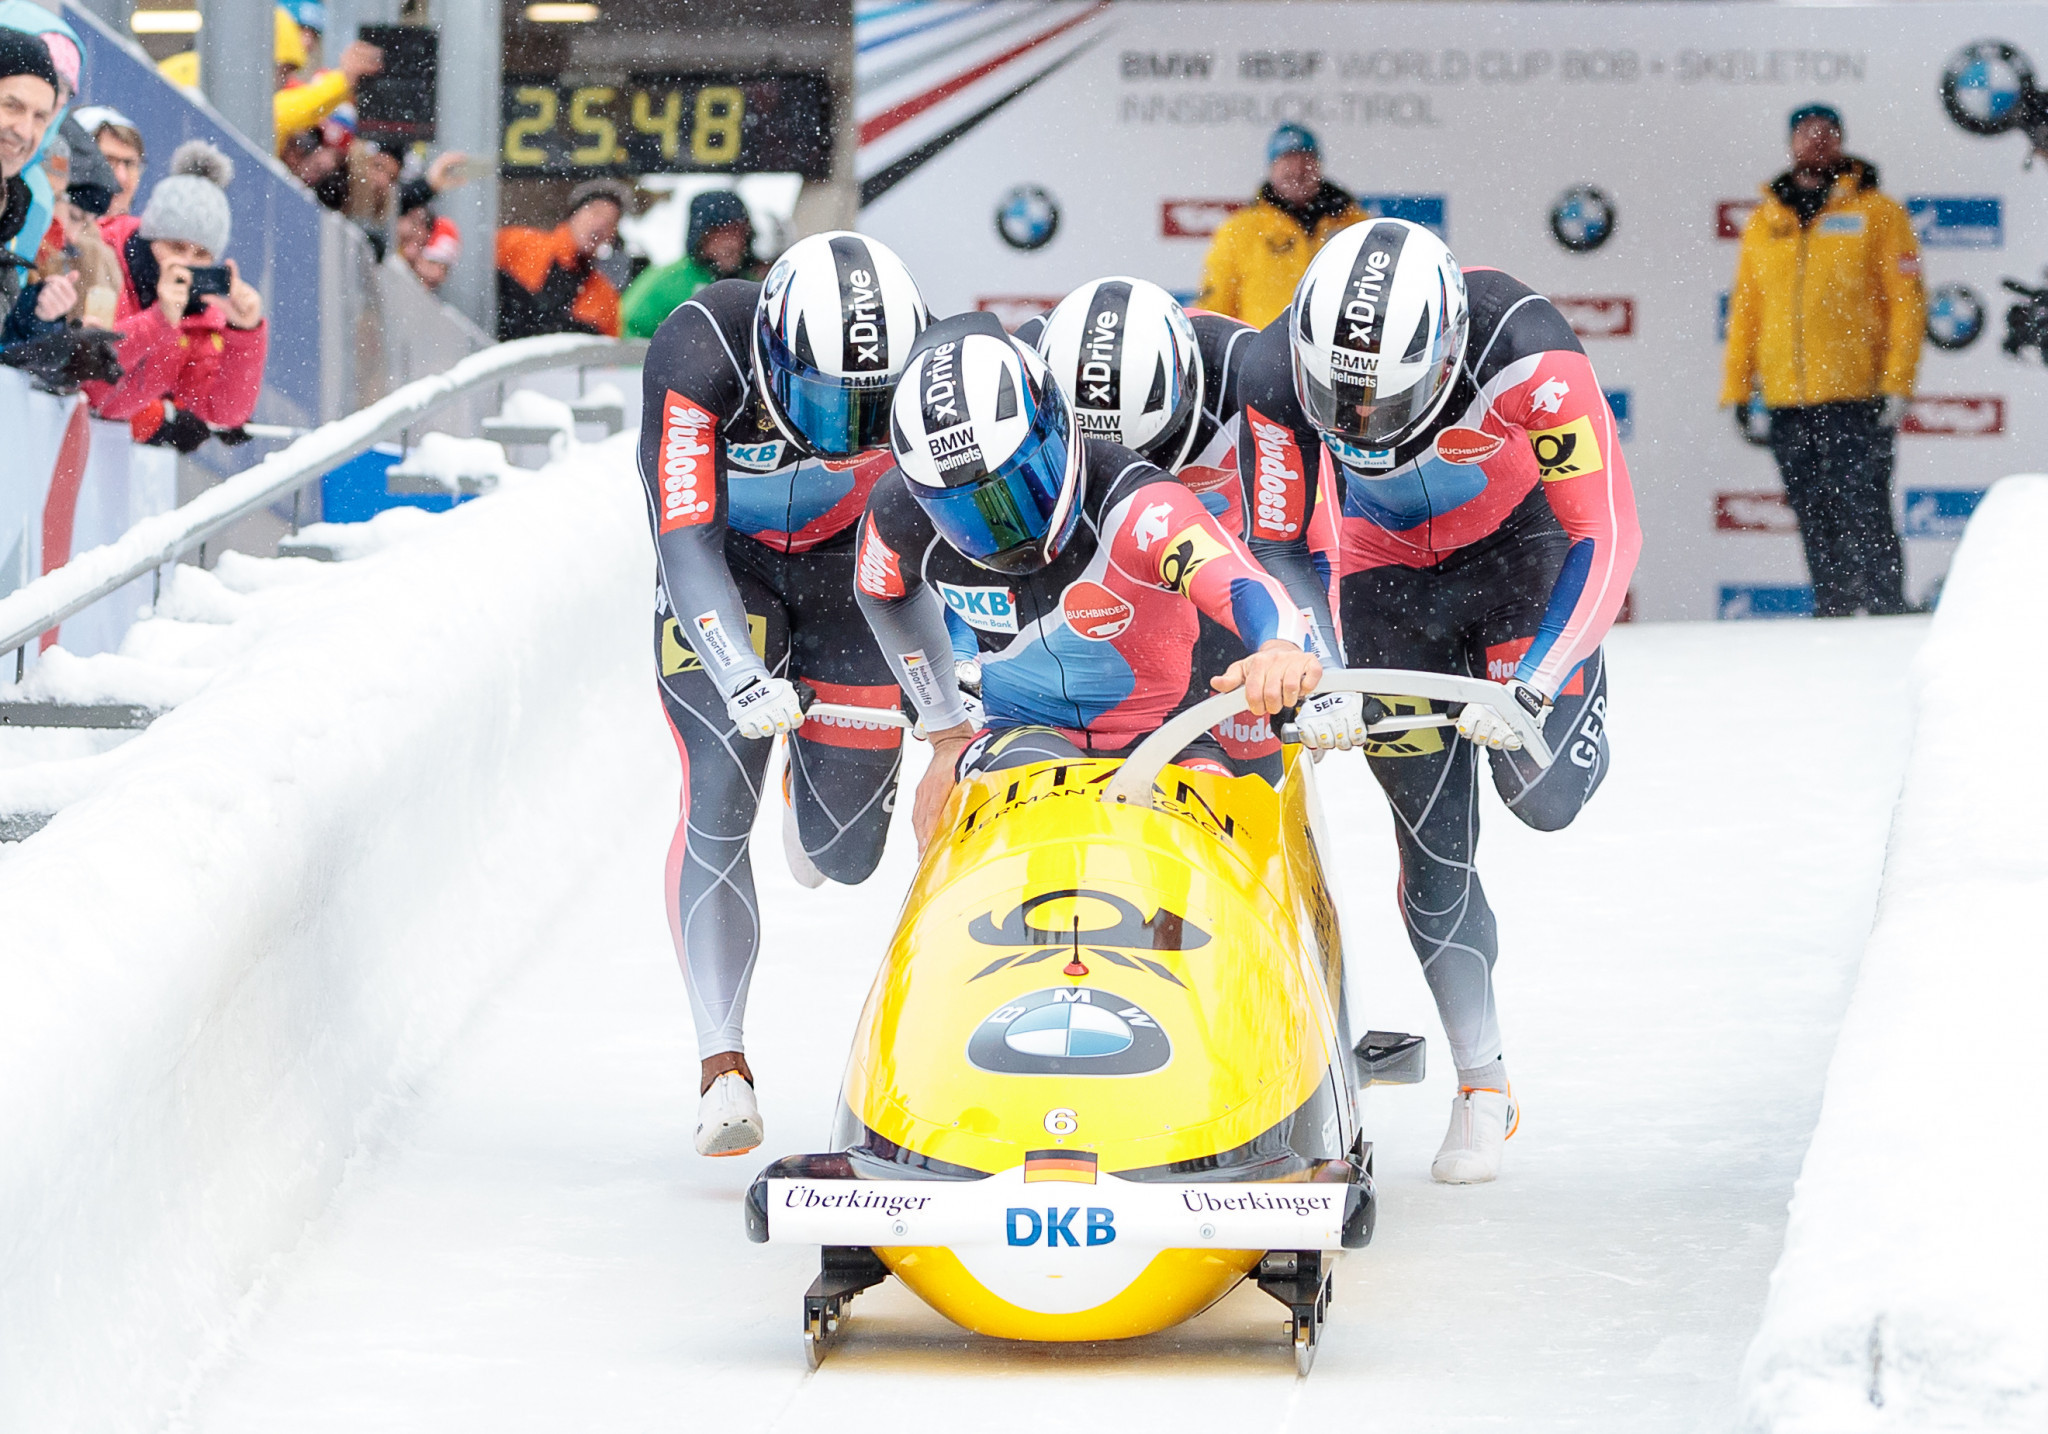 Lochner wins four-man title at IBSF World Cup and defends European crown